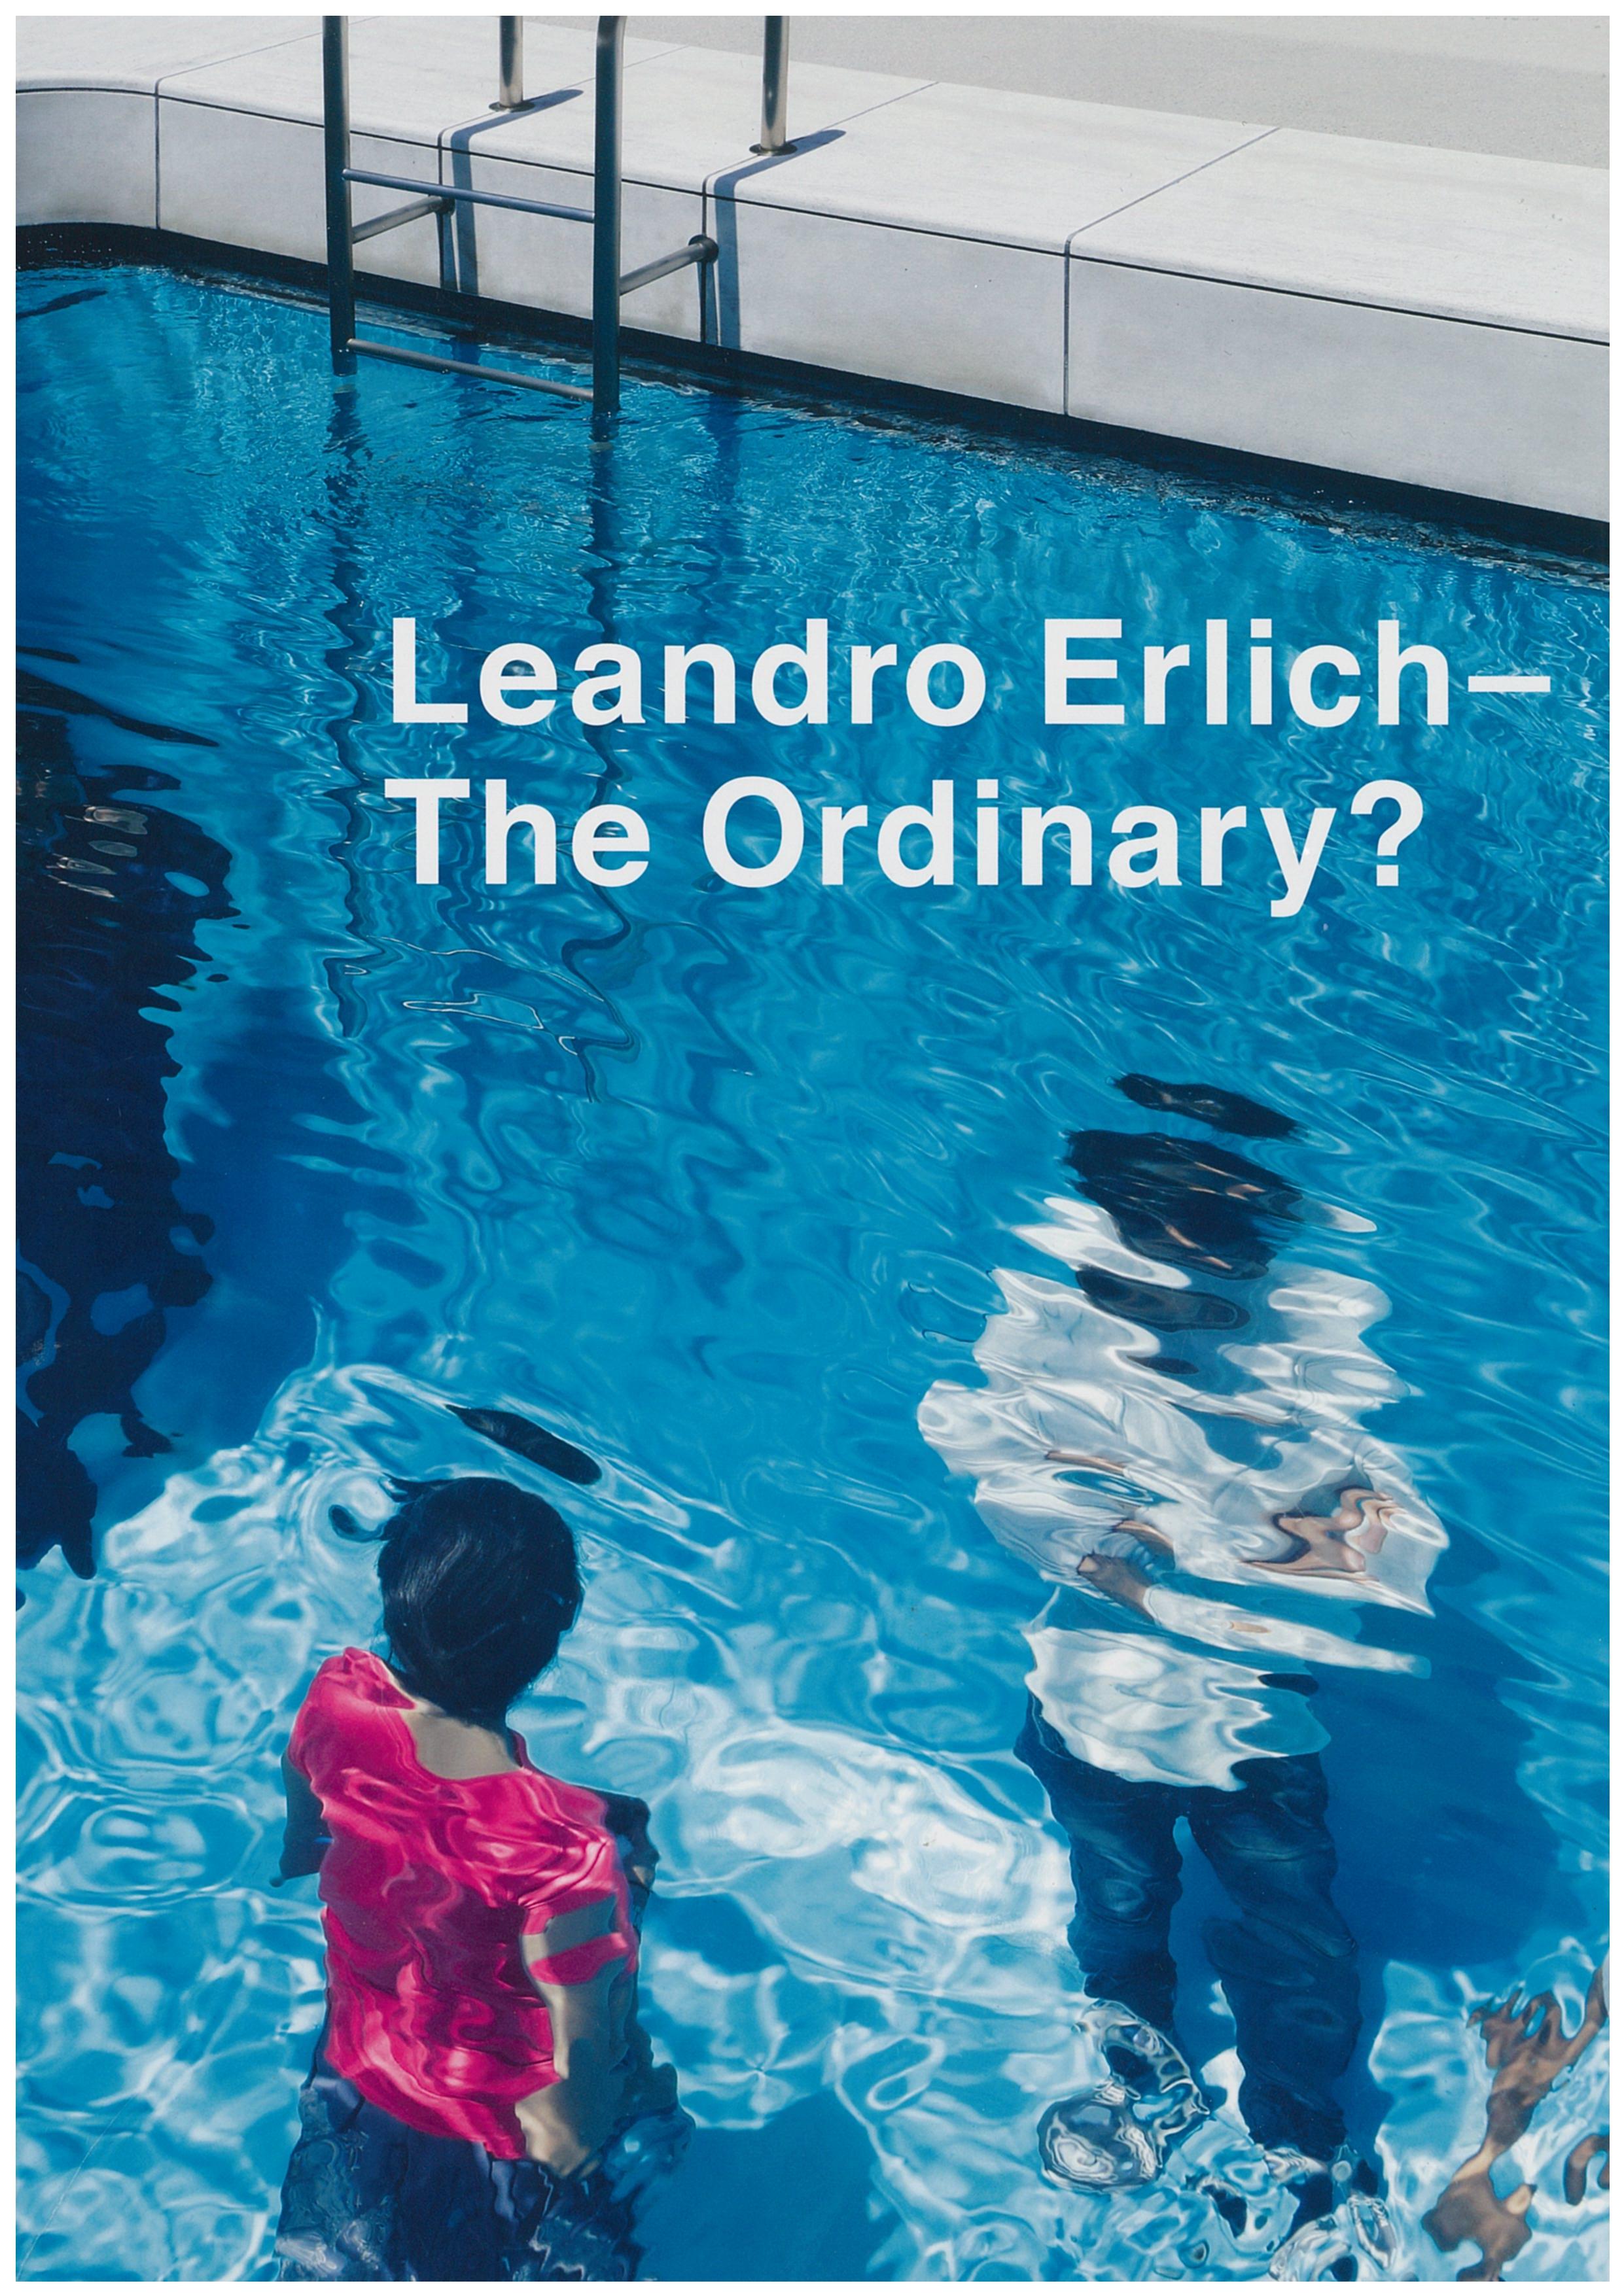 LeandroErlich-The Ordinary?